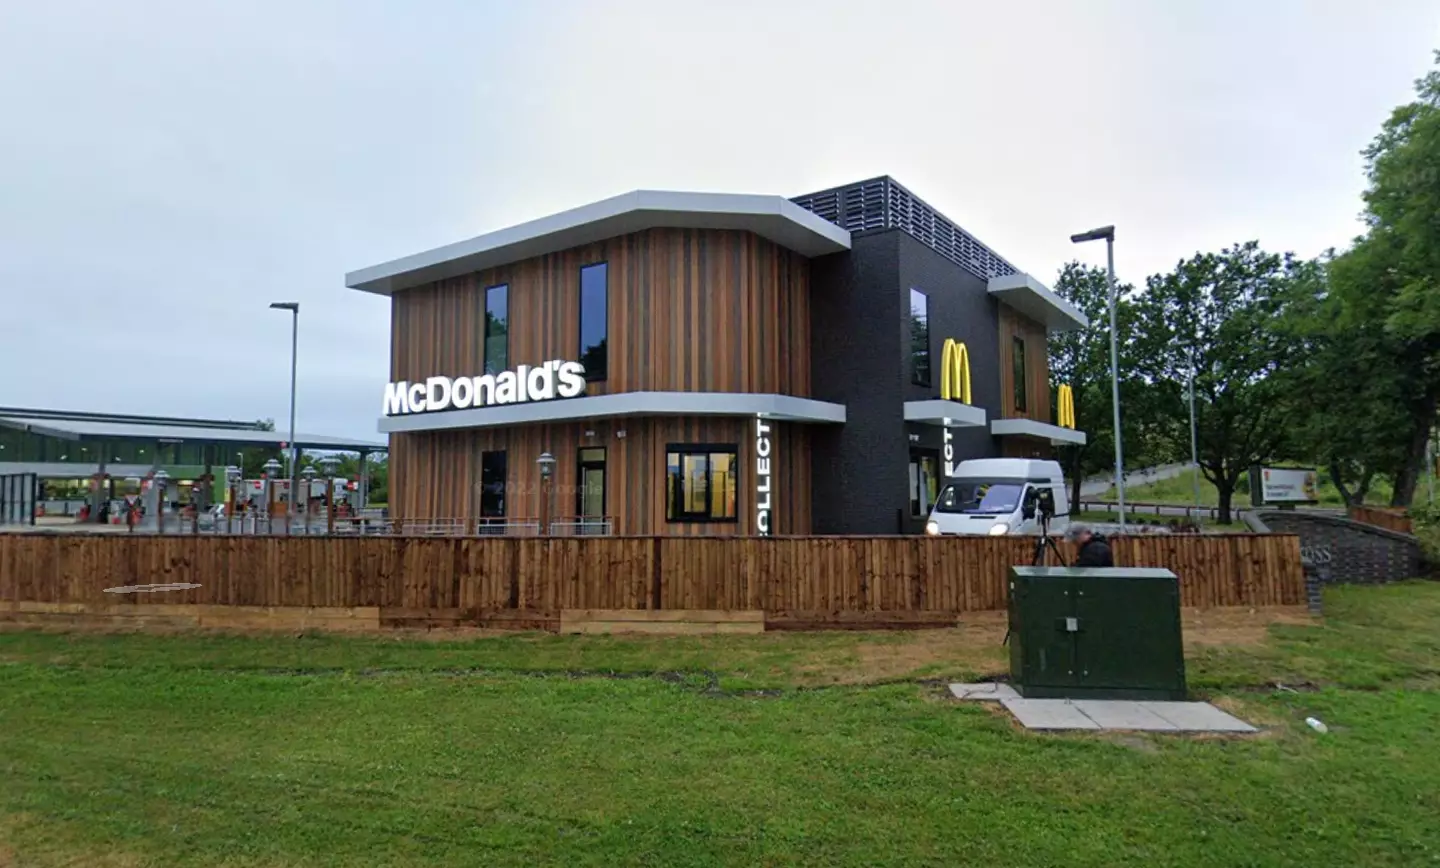 This is the world's best McDonald's, according to Ward.